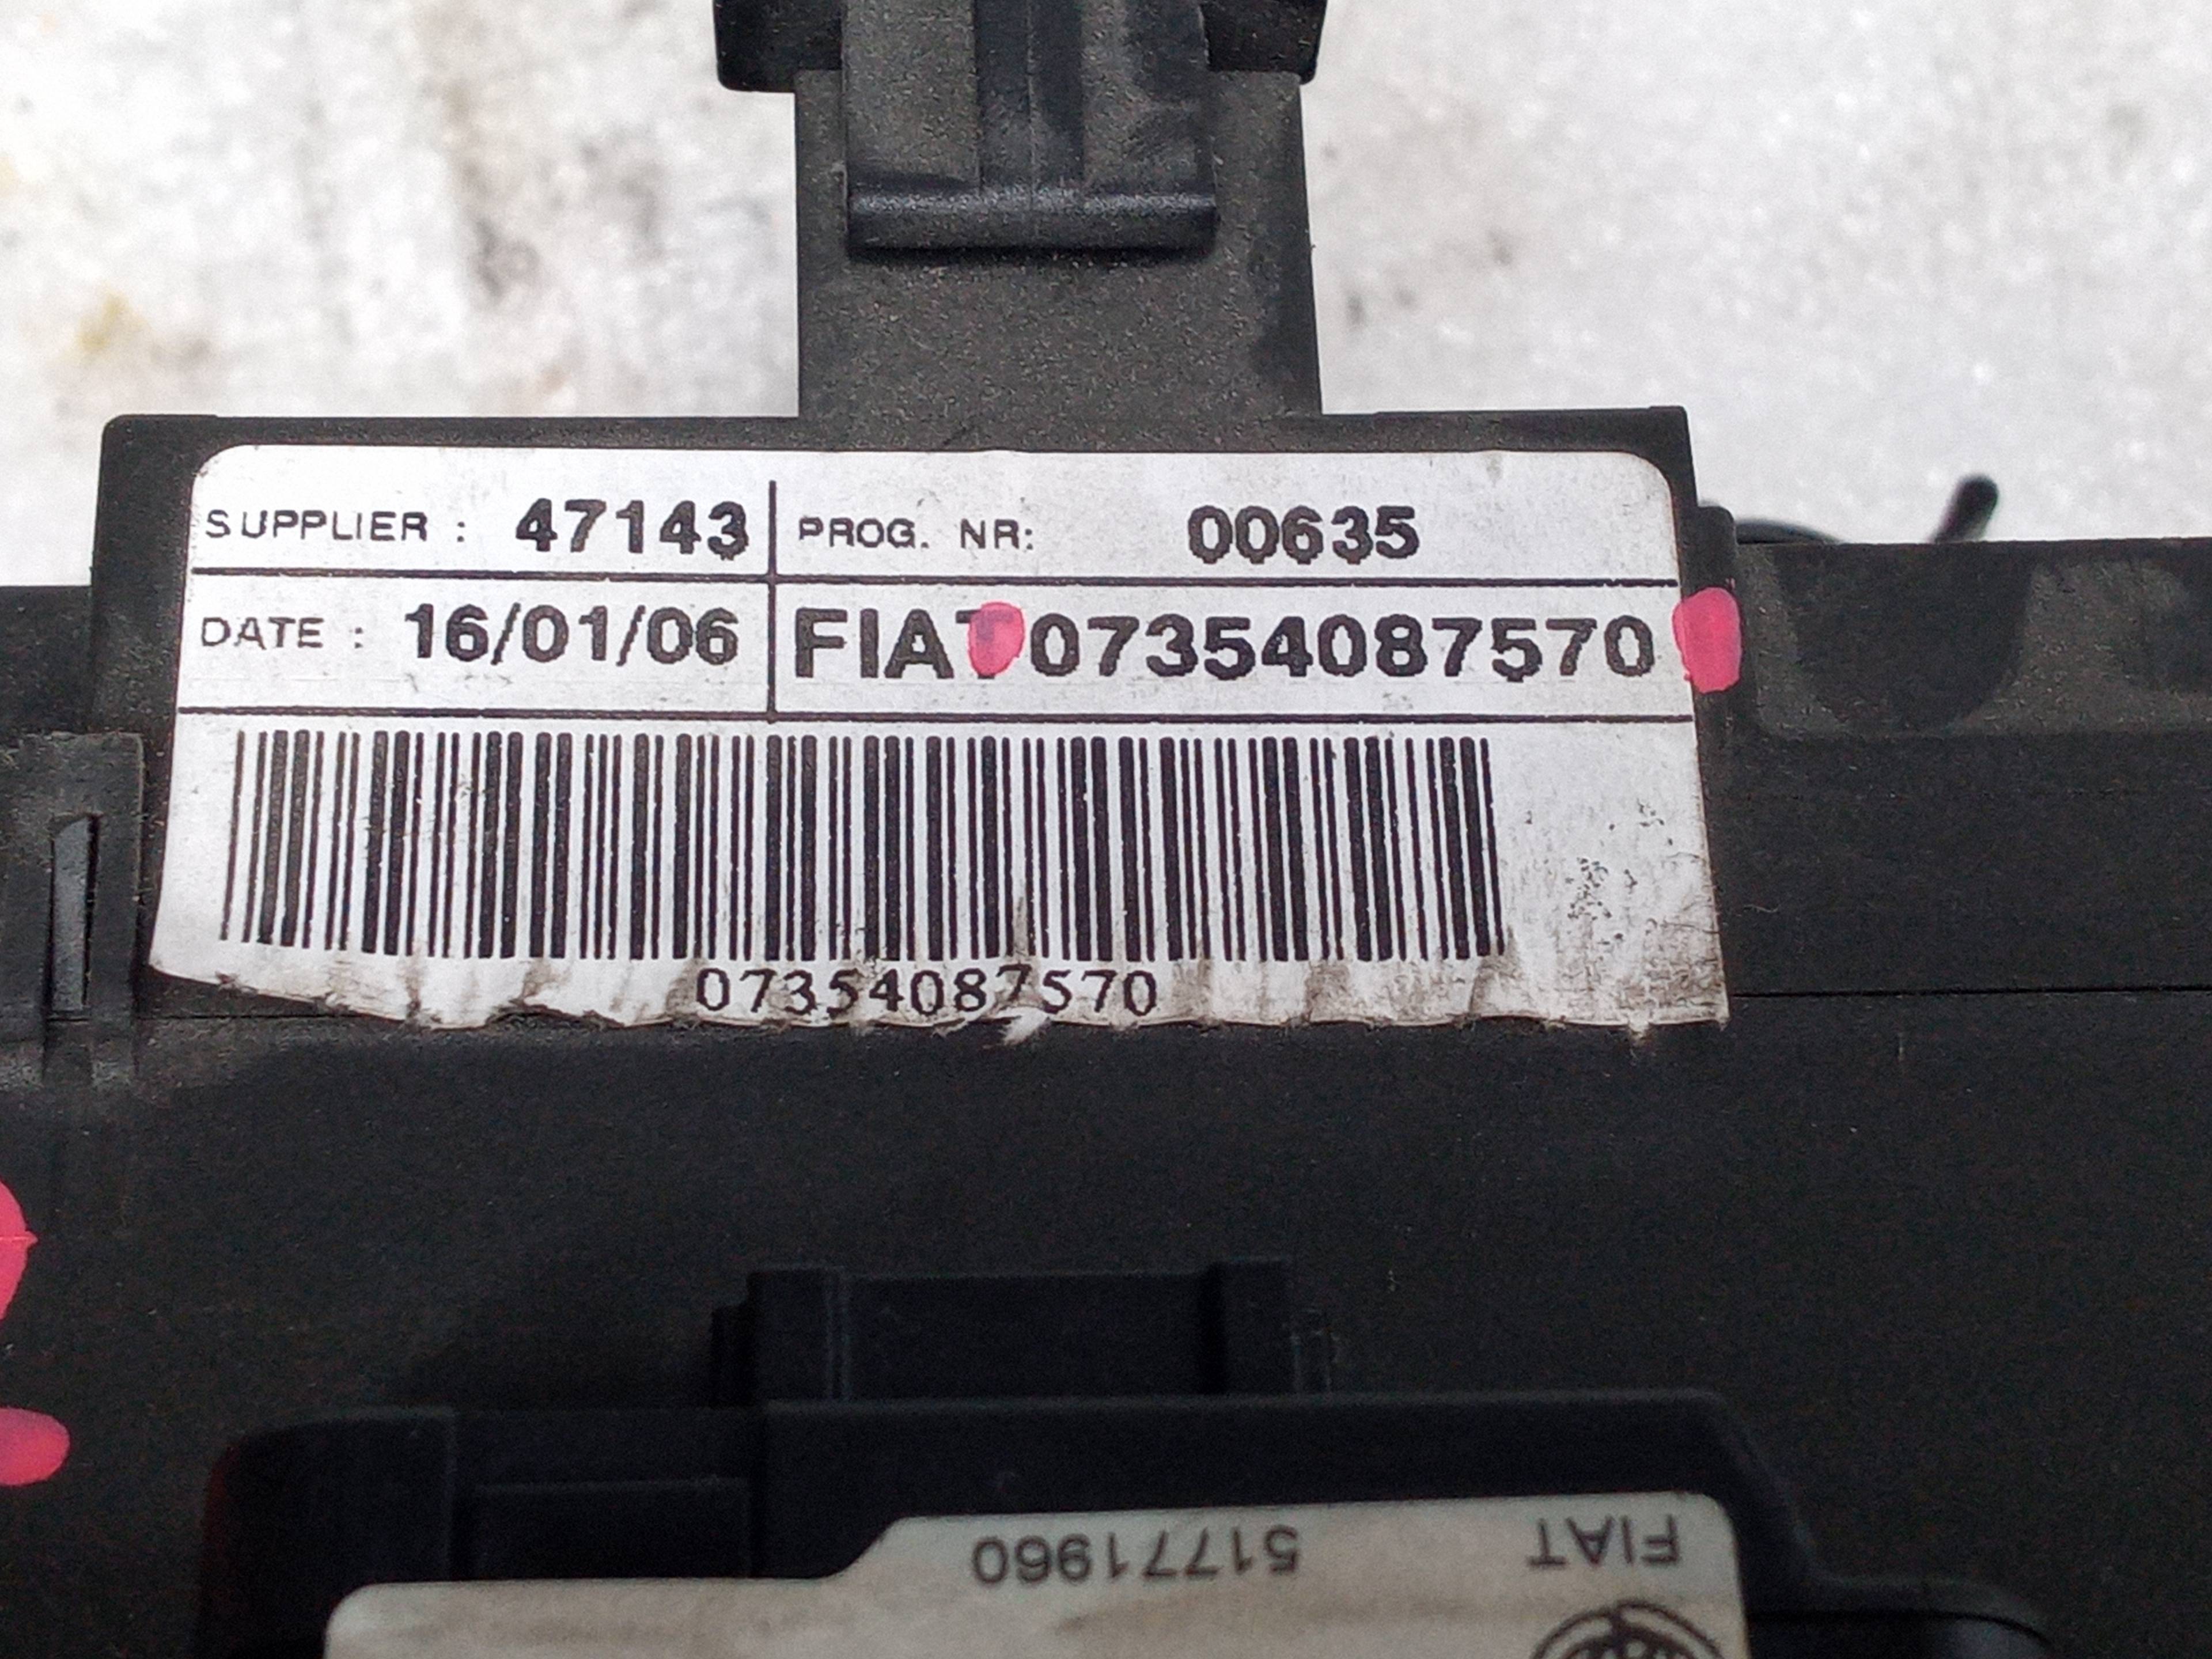 FIAT Croma 194 (2005-2011) Switches 07354087570 23802669